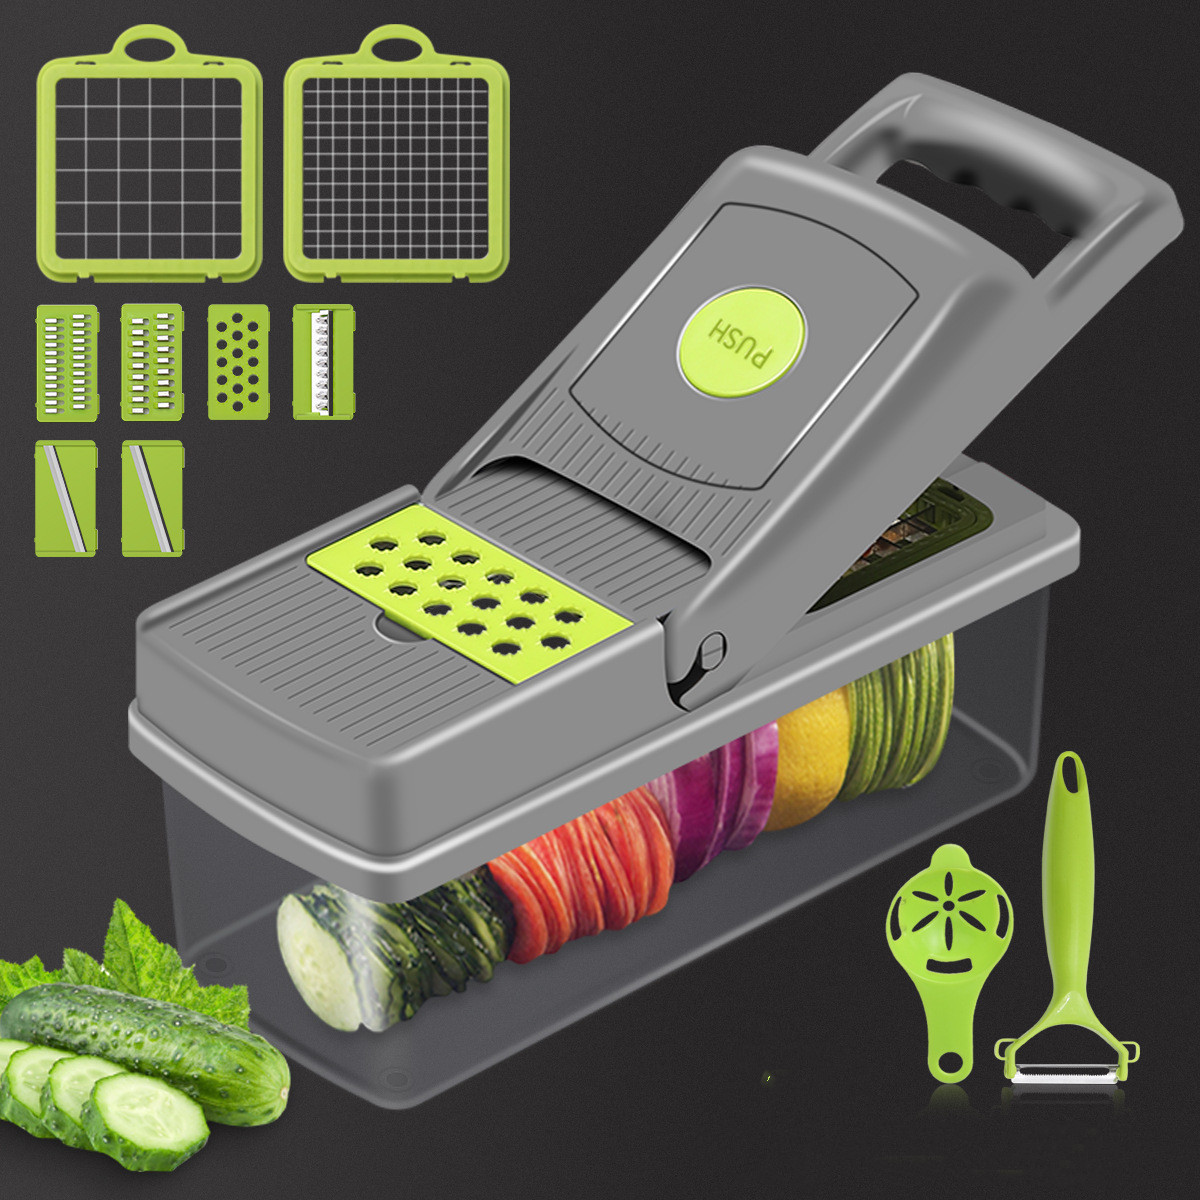 Multifunctional Manual Vegetable Cutter Mandolin Slicer Carrot Grater  Kitchen Accessories - Silver - Bed Bath & Beyond - 29801183